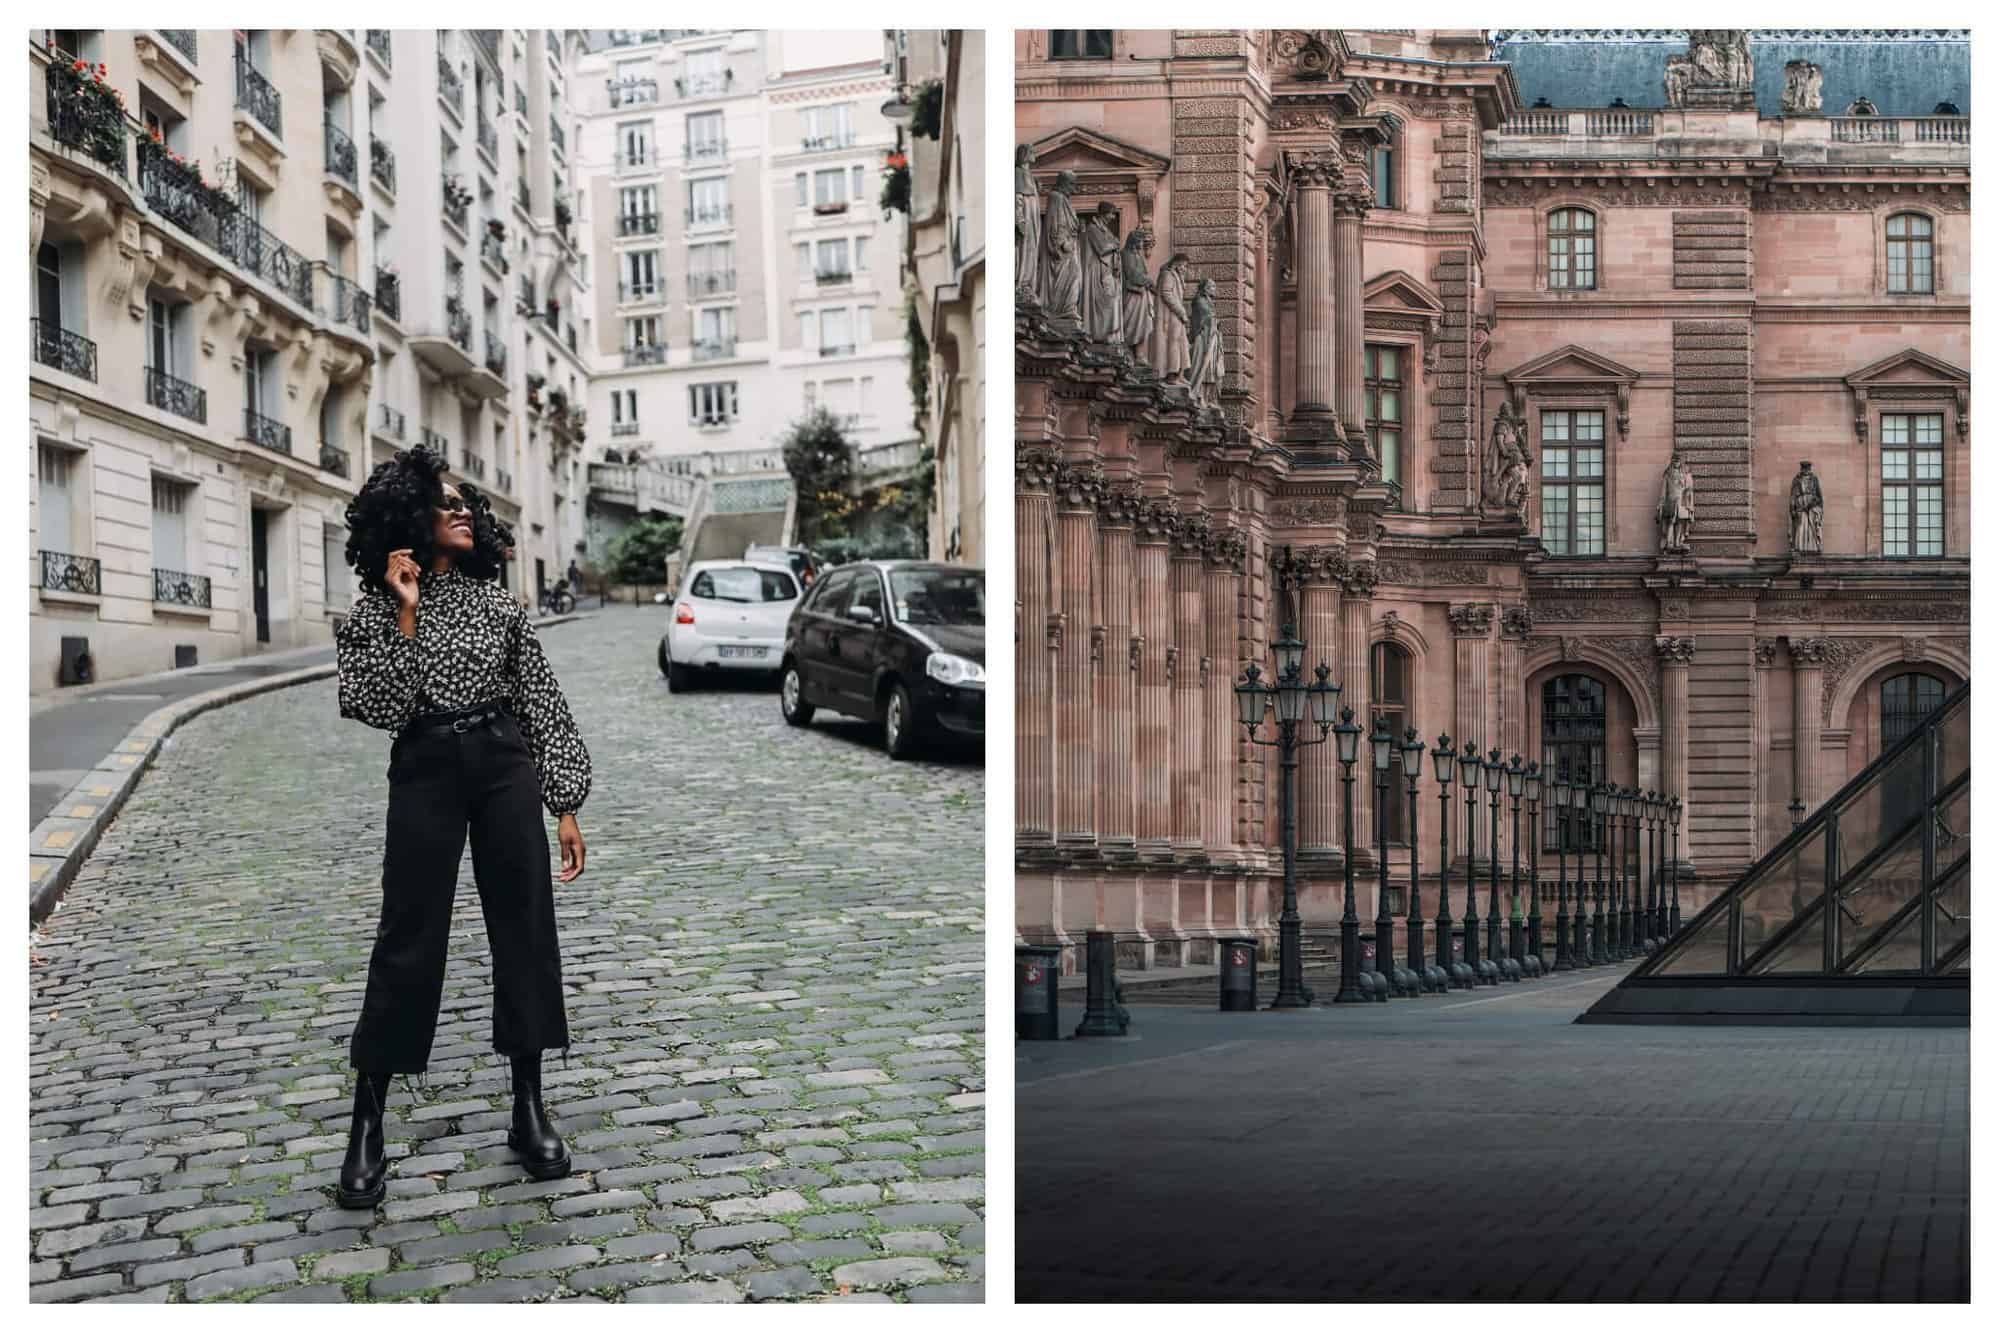 Left: A woman stands on a street in Paris, looking up. She is wearing a black and white polka dot shirt, black pants, and black boots. Right: The Louvre Pyramid in Paris. 